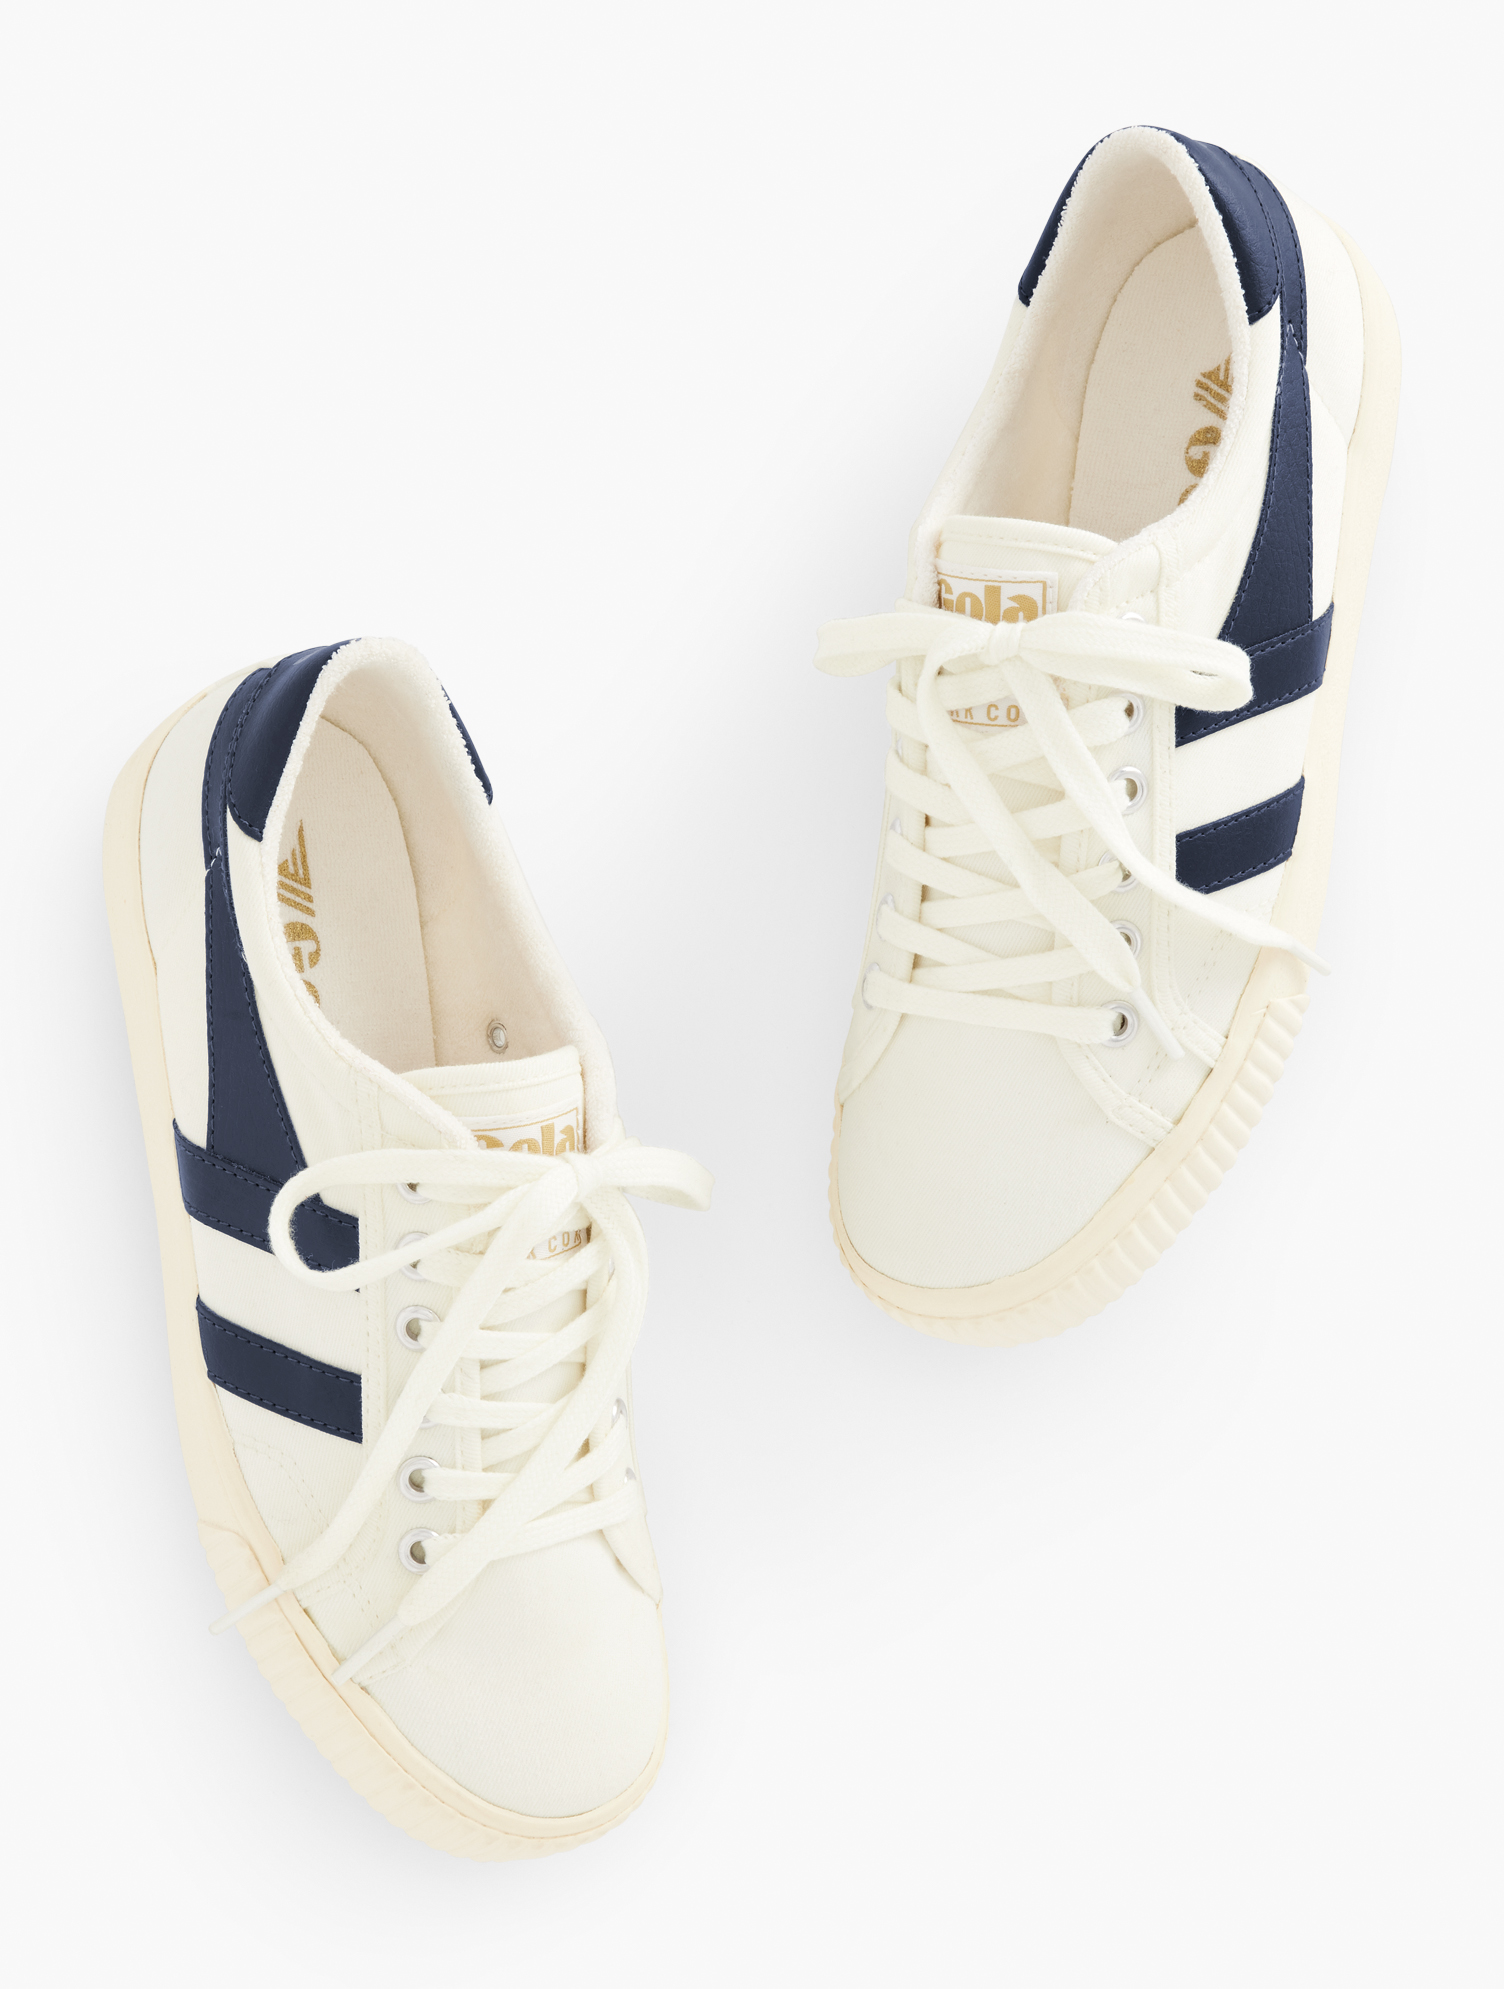 Talbots Â® Mark Cox Tennis Sneakers - Off White/navy Blue - 11m - 100% Cotton  In Off White,navy Blue